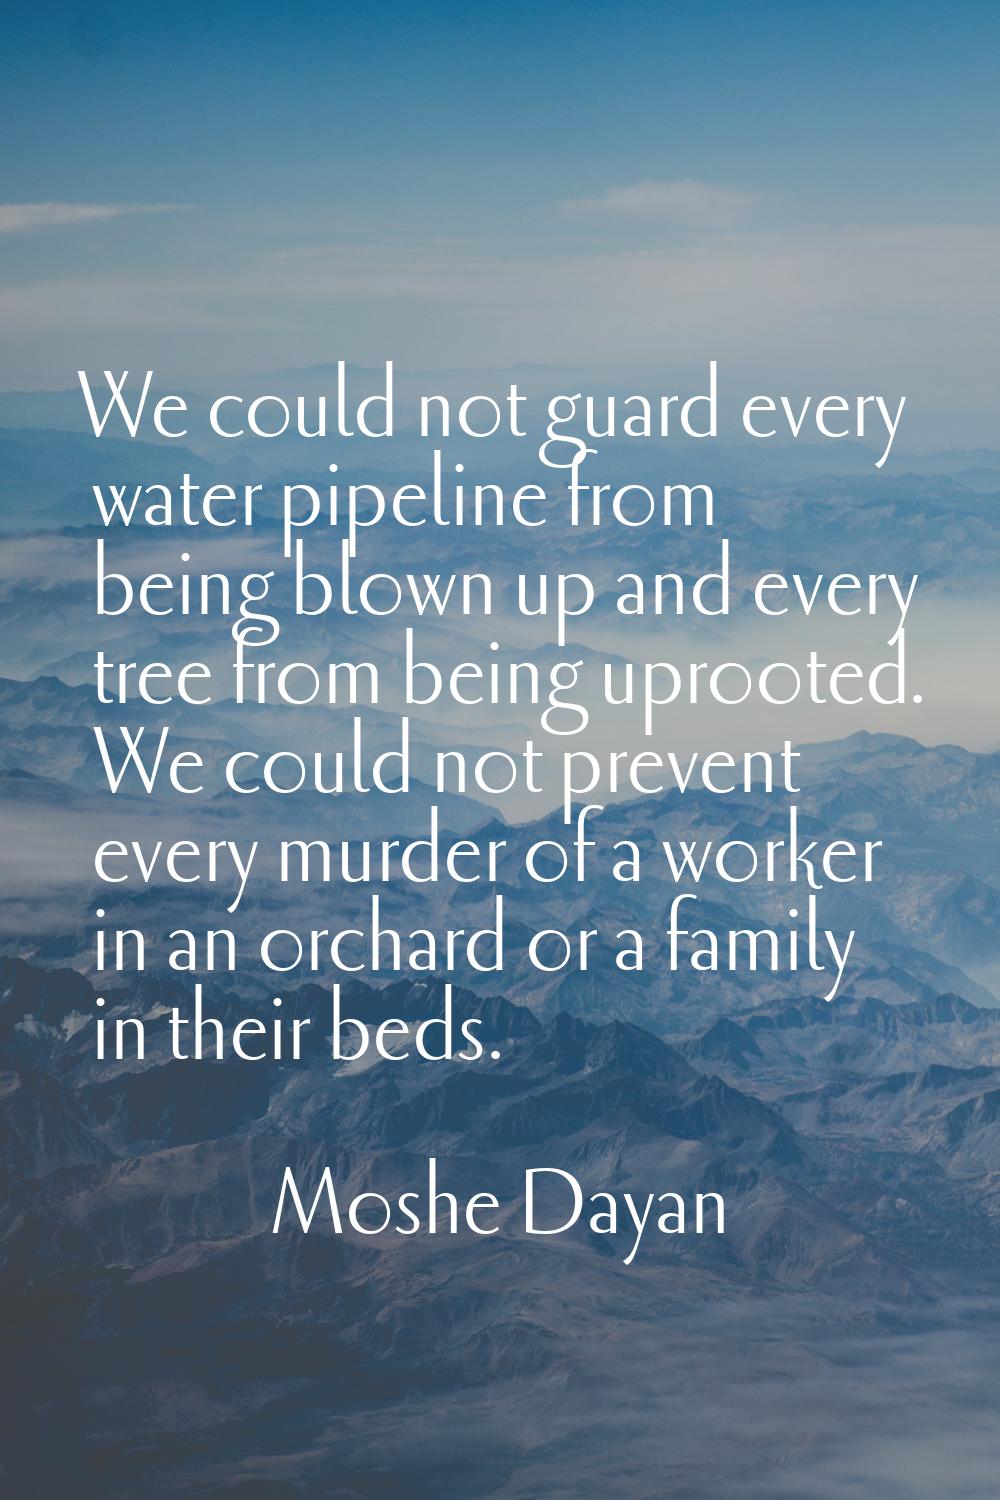 We could not guard every water pipeline from being blown up and every tree from being uprooted. We 